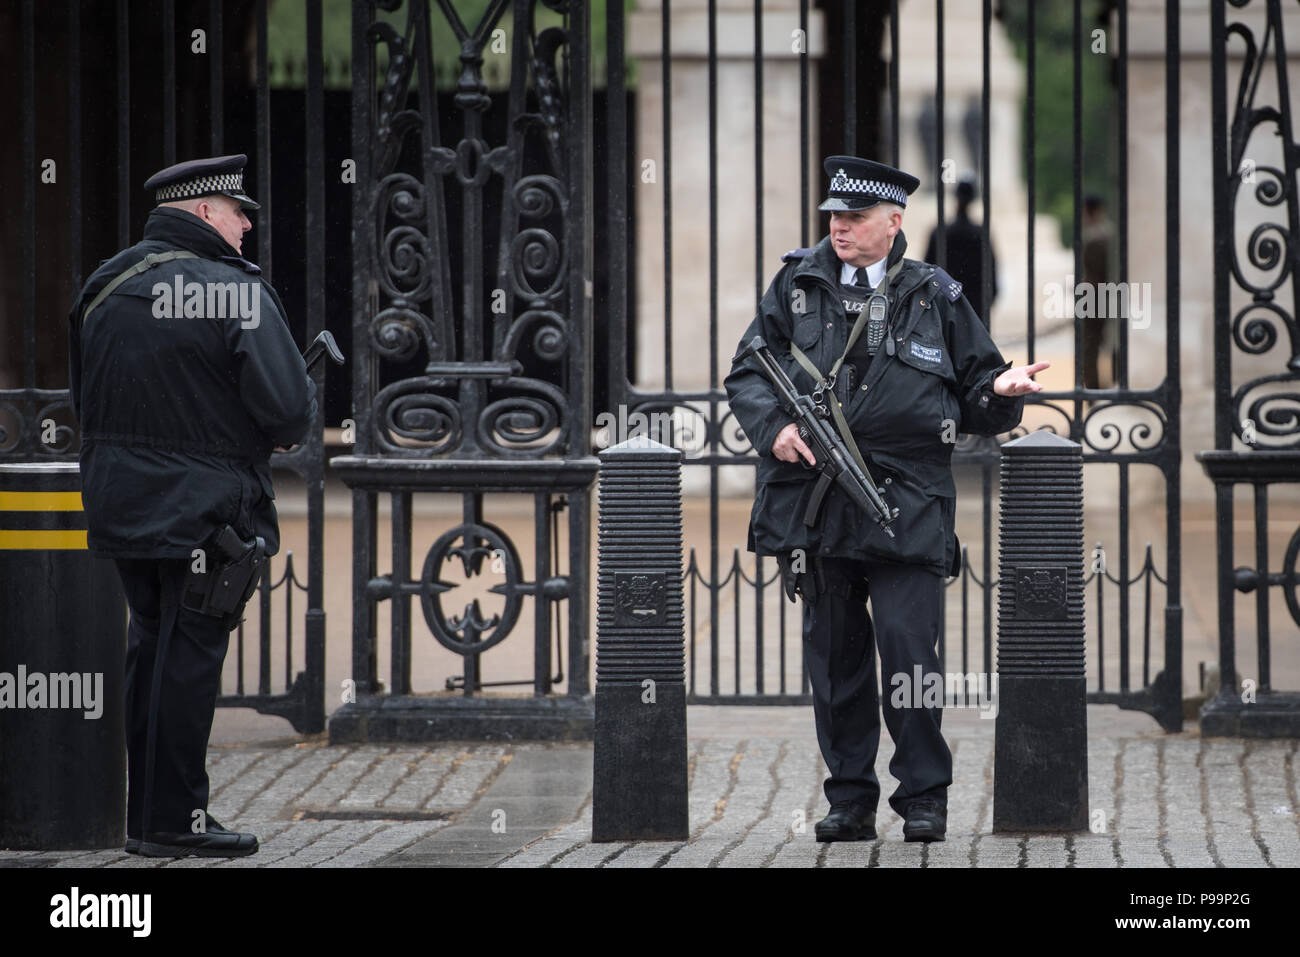 Horse Guards Arch, Whitehall, London, UK. 18th May 2016. Security in Westminster remains high this morning as hundreds of police officers and road blo Stock Photo